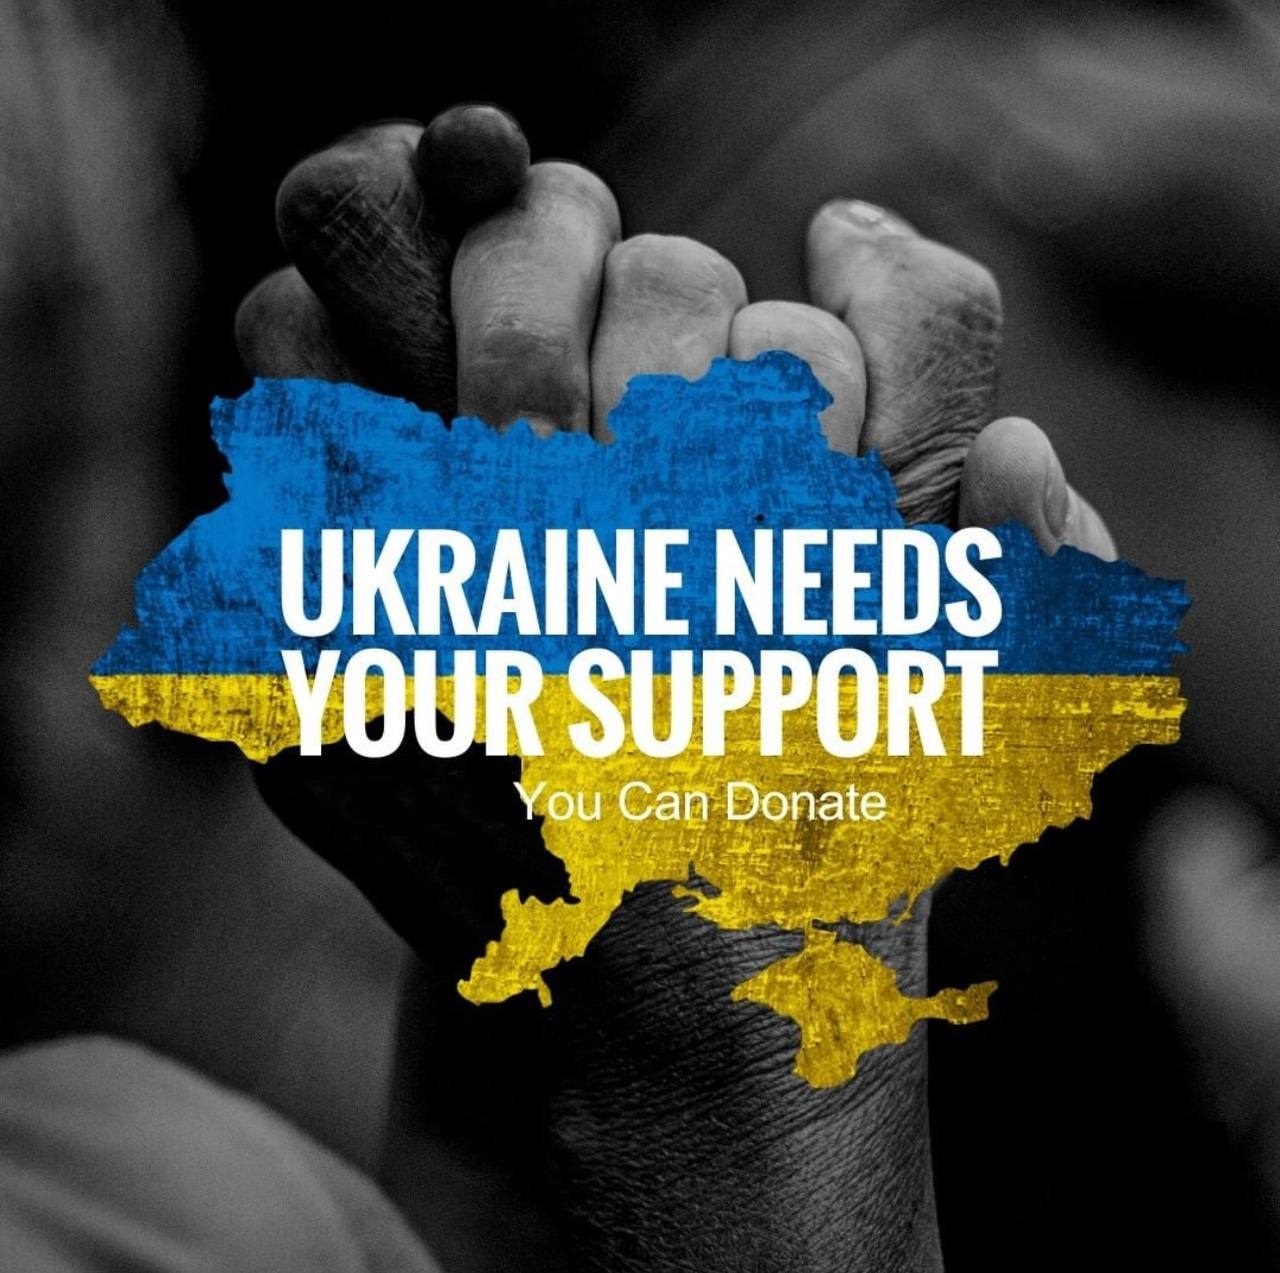 Donation4Charity is raising funds for victims of war in Ukraine